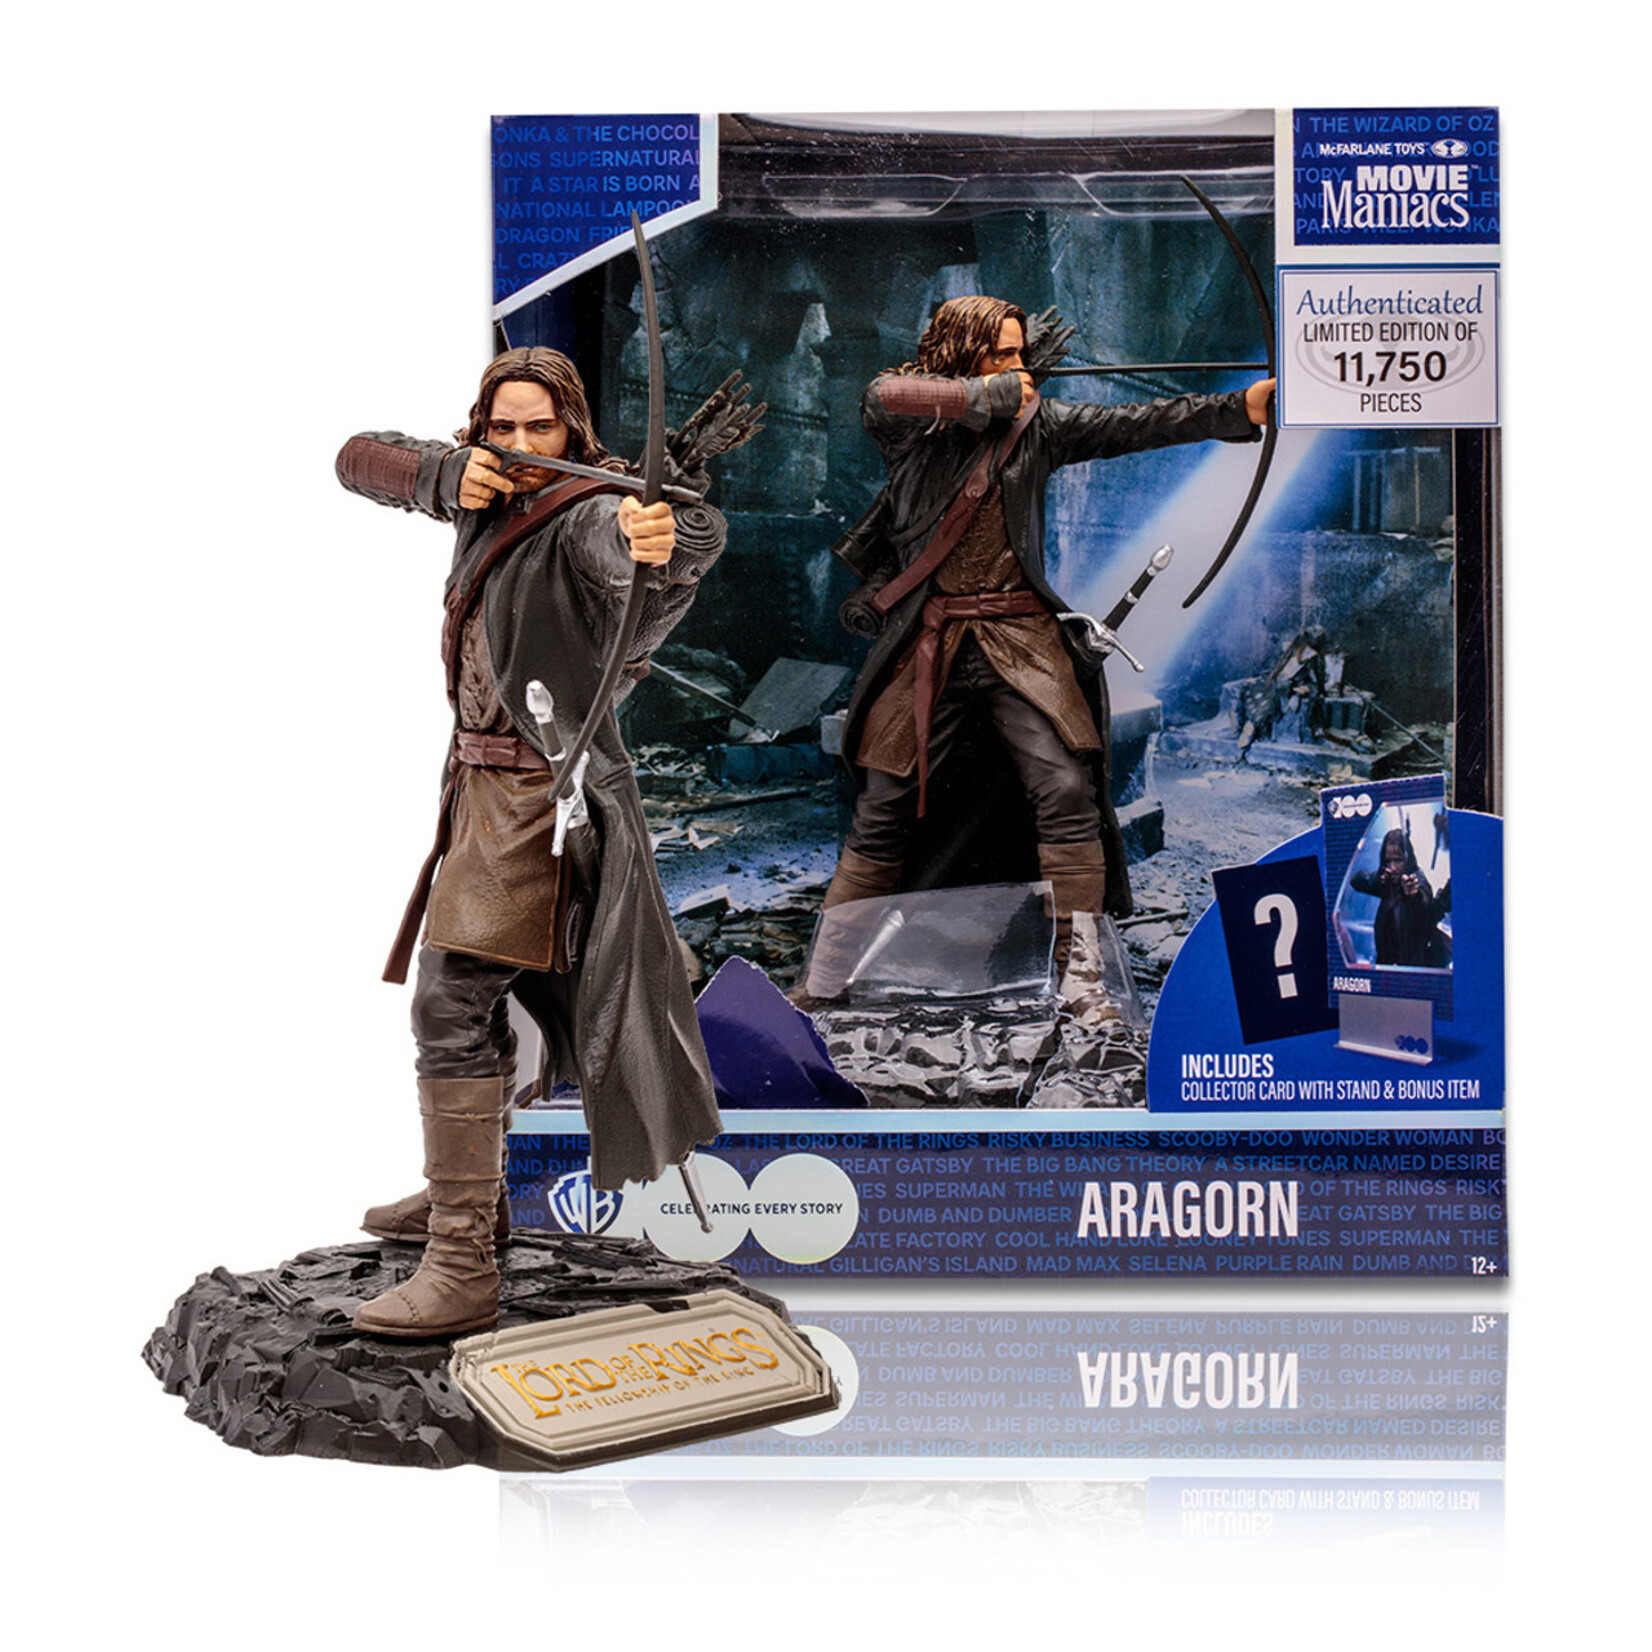 McFarlane Toys McFarlane Toys Lord of the Rings Movie Maniacs Action Figure Aragorn 15 cm